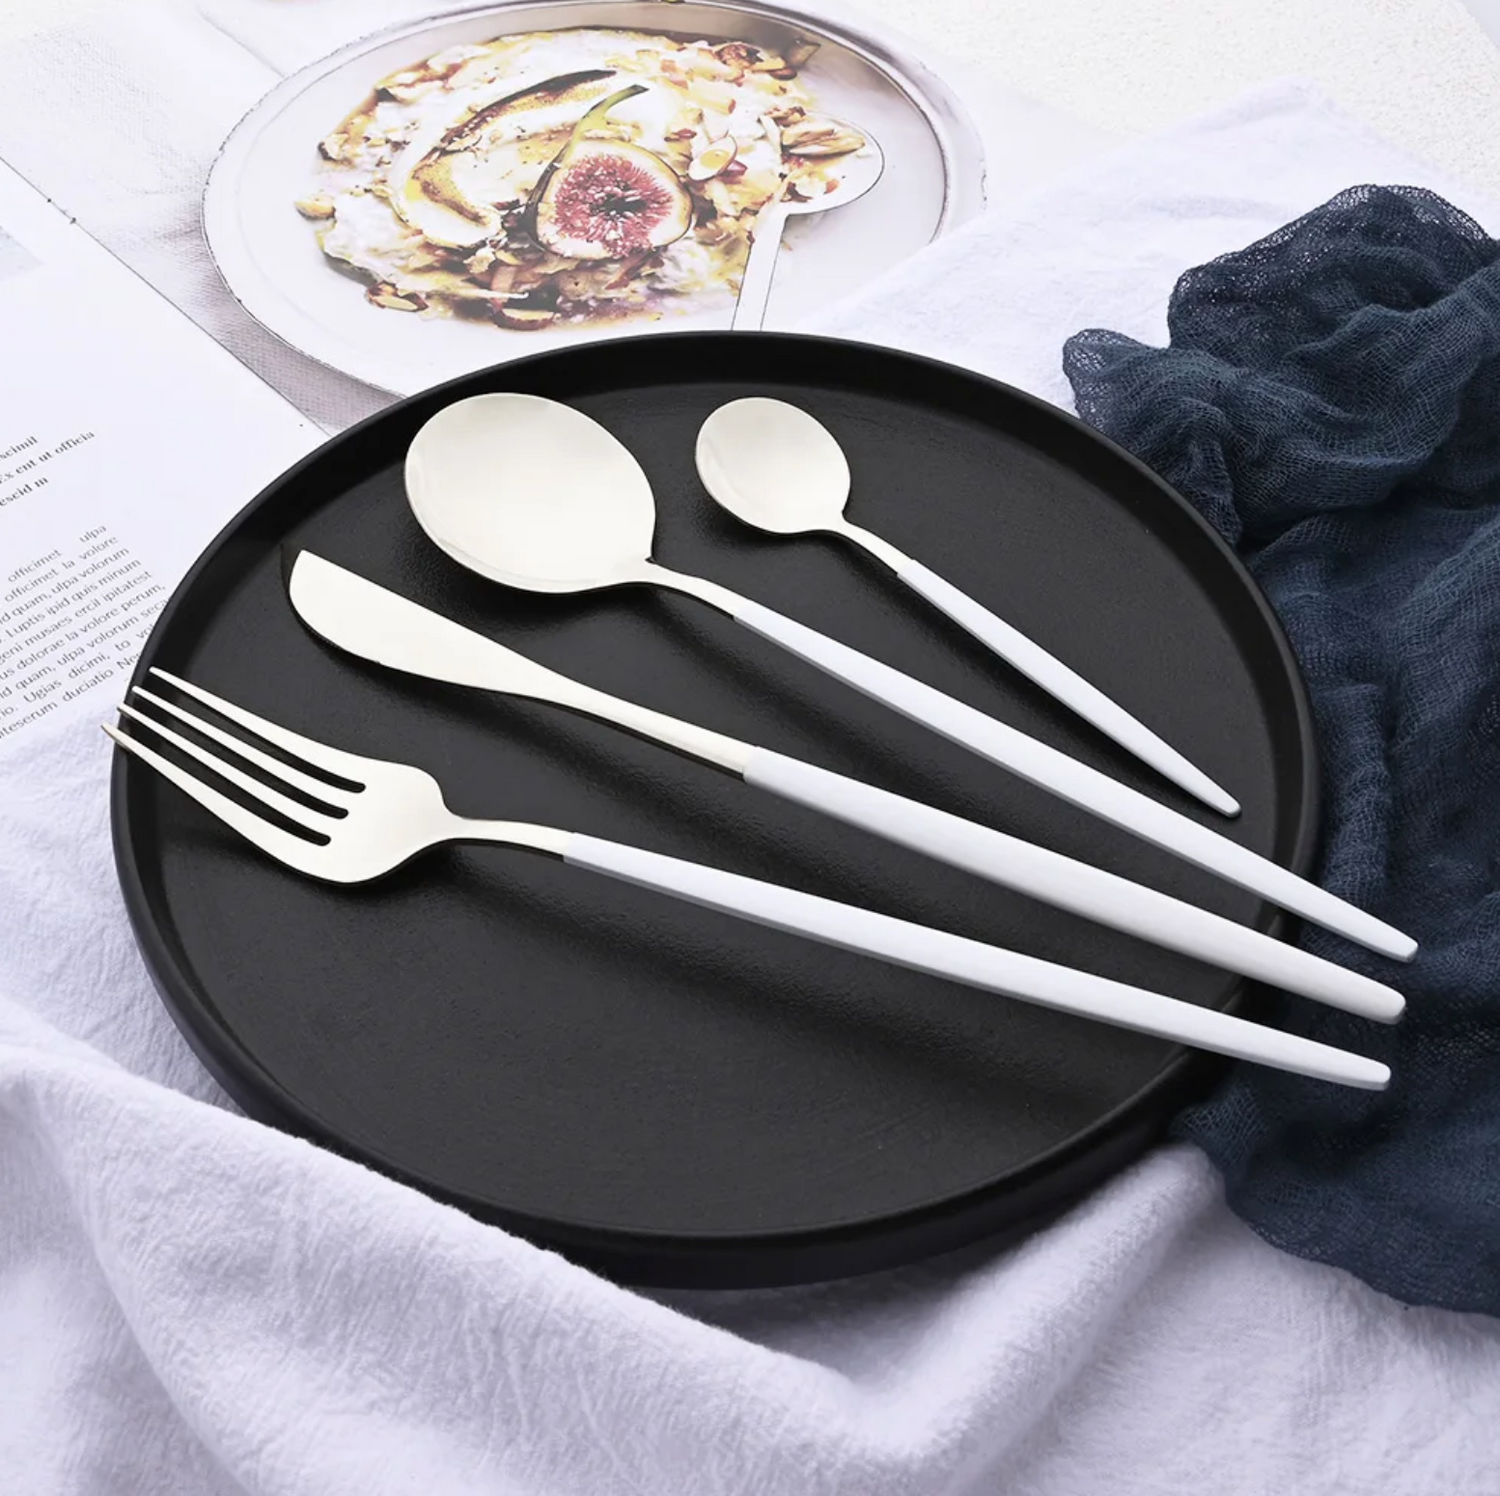 Sovereign Series Luxury Cutlery Sets